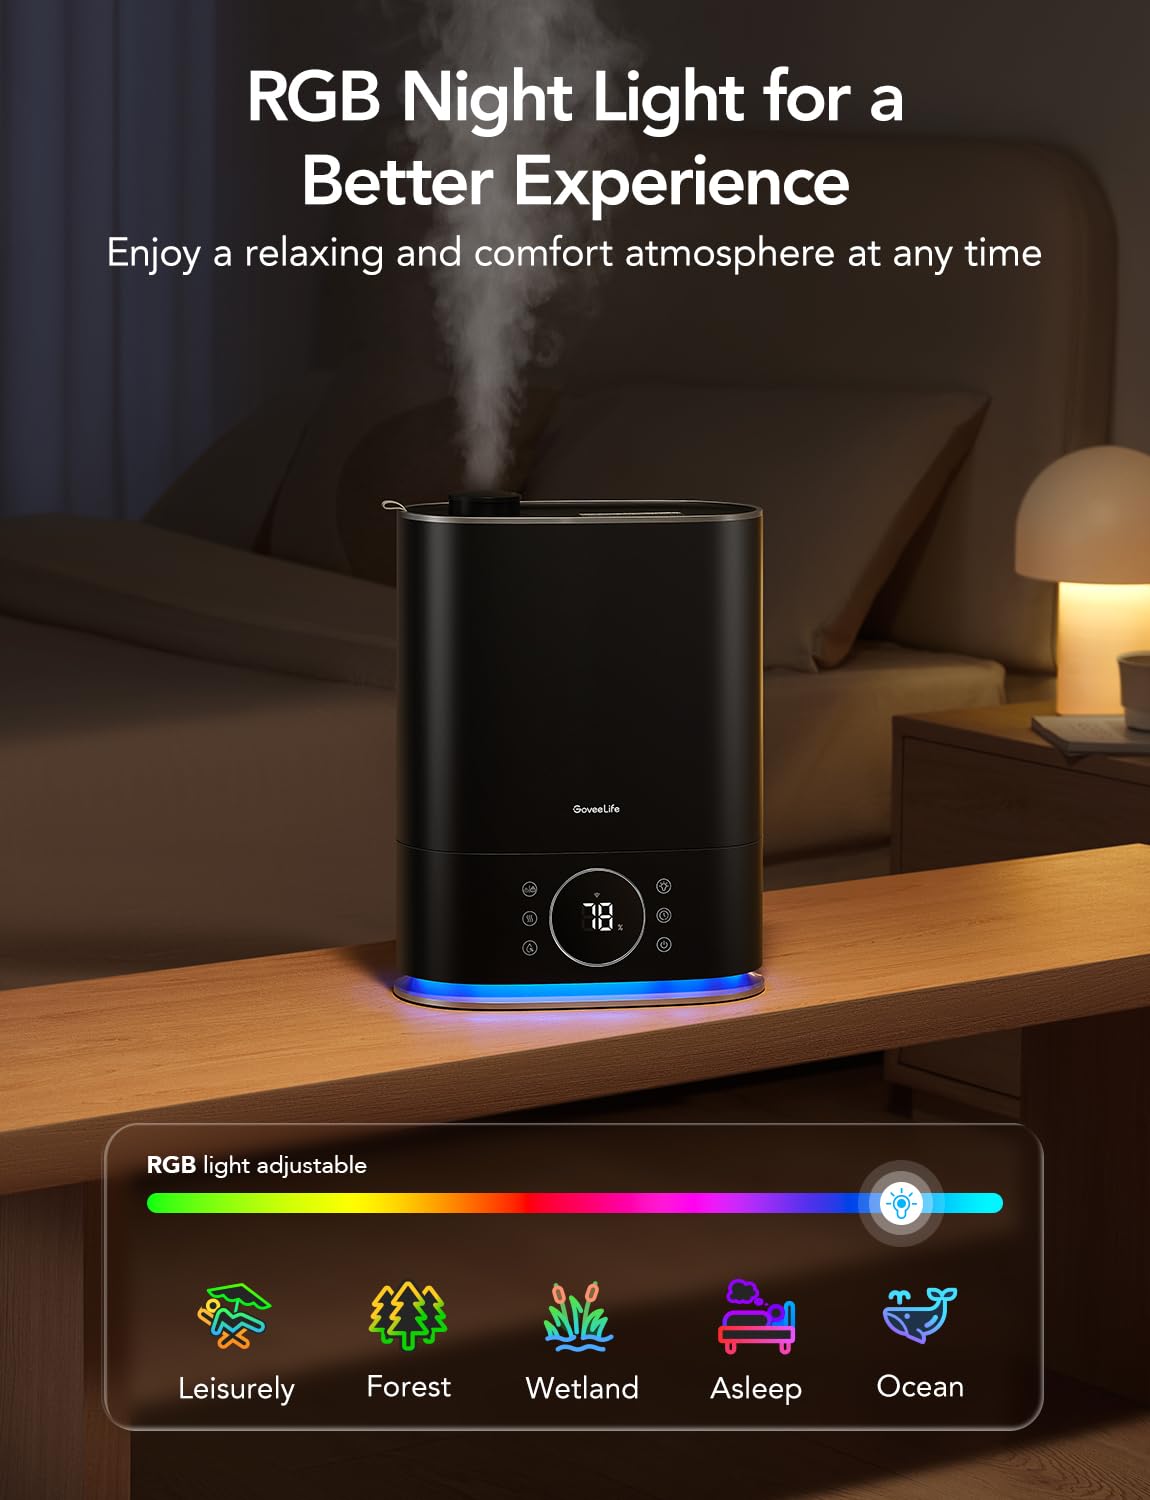 GoveeLife Smart Humidifier Max, 7L Warm and Cool Mist WiFi Humidifier for Home Bedroom, Top Fill Humidifiers 70H, Lasts for Large Rooms up to 800sq.ft, Faster Humidification with Alexa and App Control